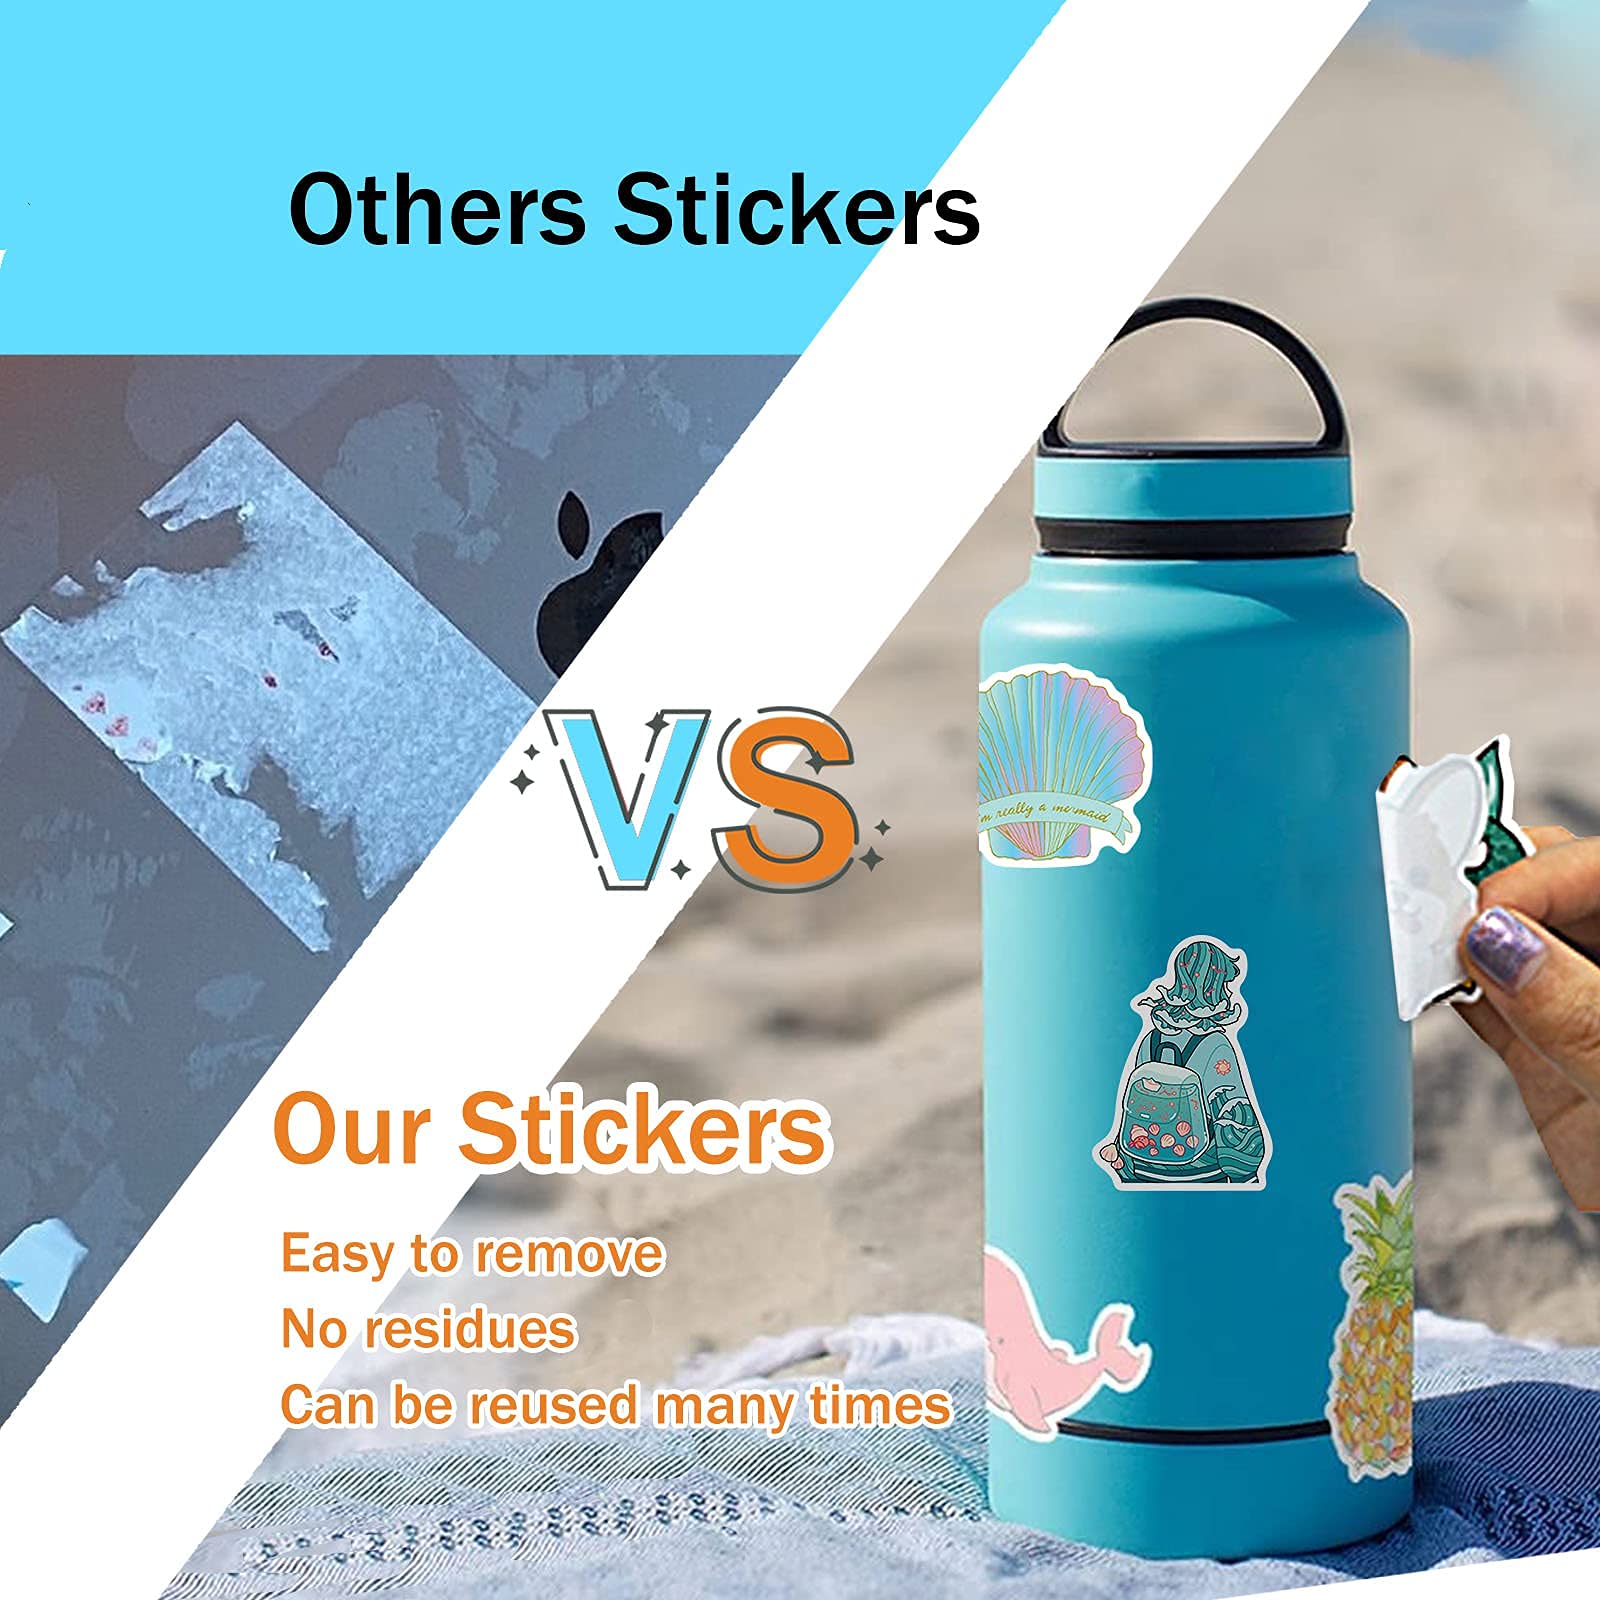 200 PCS Stickers for Water Bottles, Cute Vinyl Waterproof Aesthetic Stickers, Cool Stickers for Hydroflask Car Skateboard Laptop Hard Hat Suitcase, Perfect Gifts for Kids, Teens, Adults